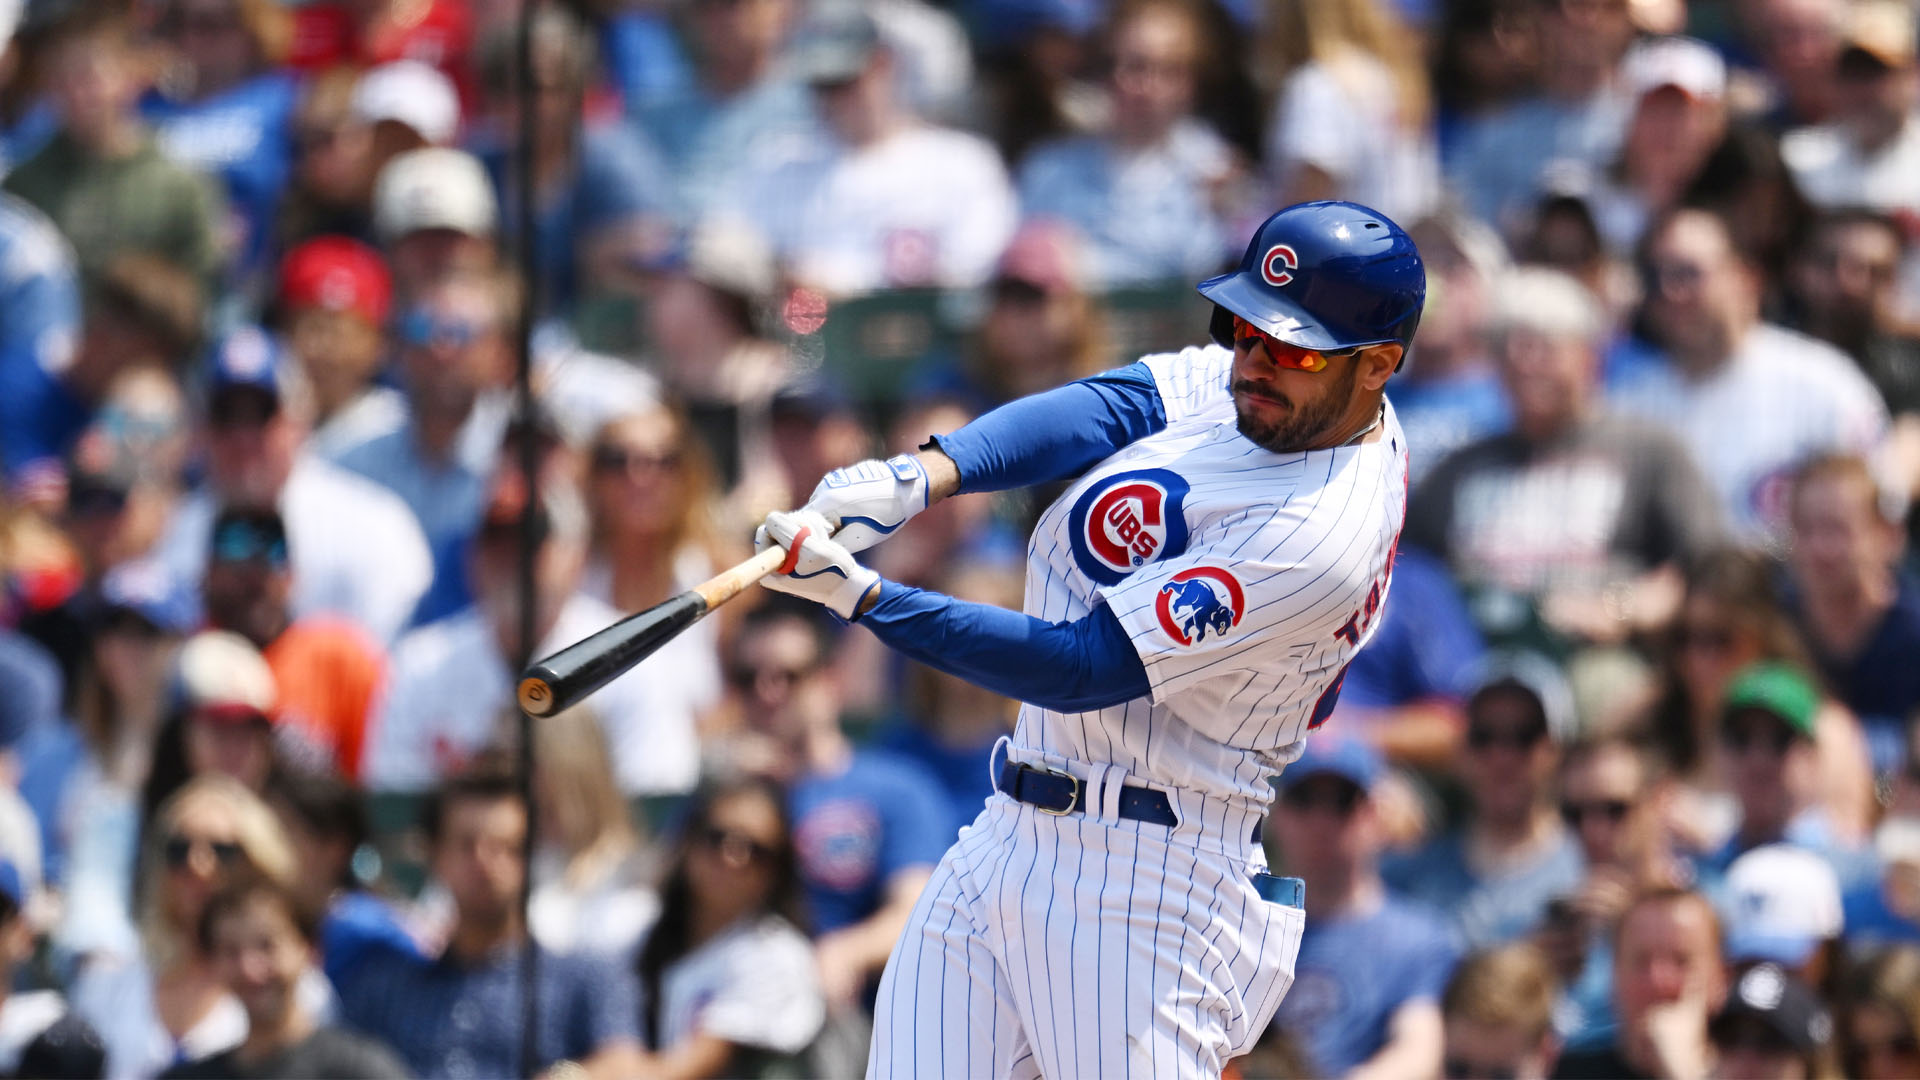 Chicago Cubs' Mike Tauchman during a baseball game against the San